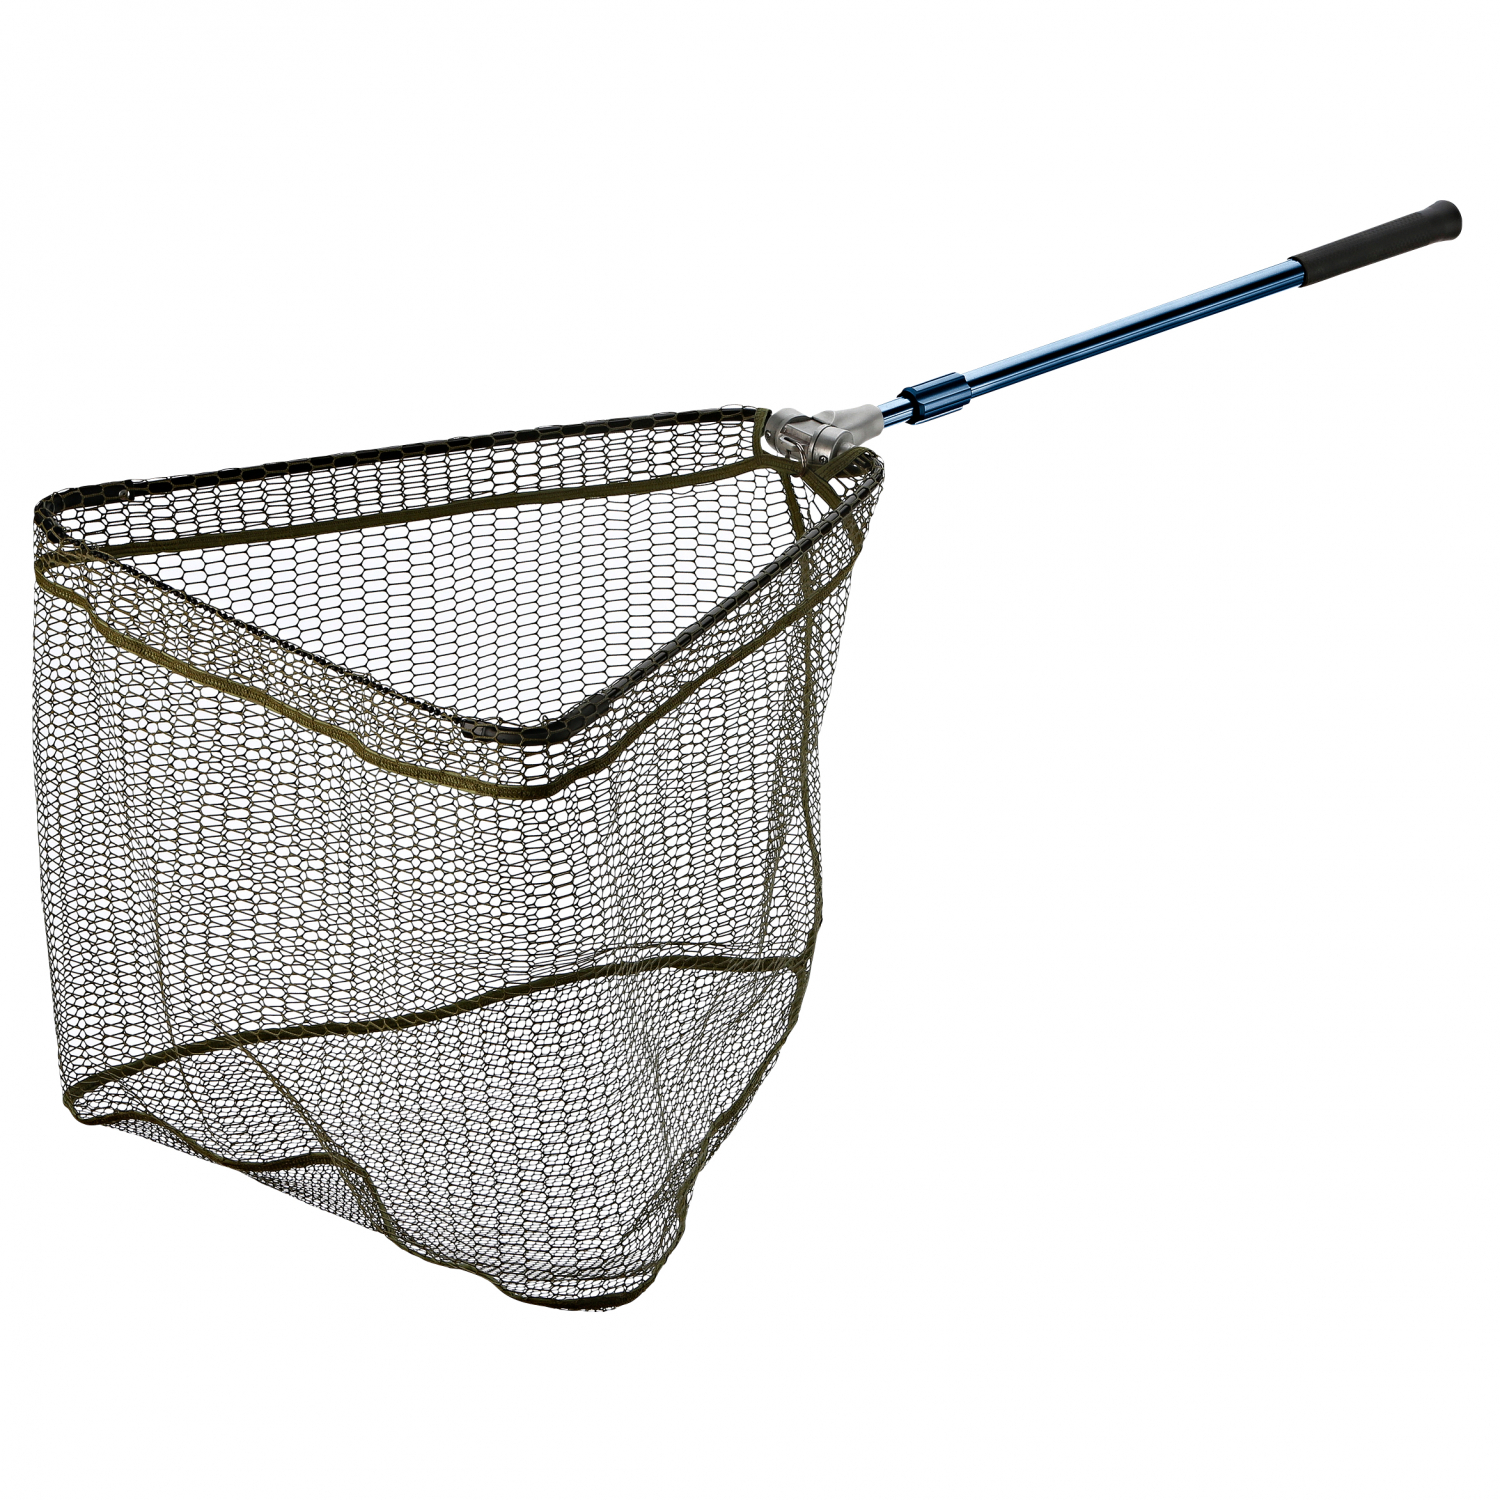 Cormoran Folding Net Modell 6245 (2-sections) at low prices